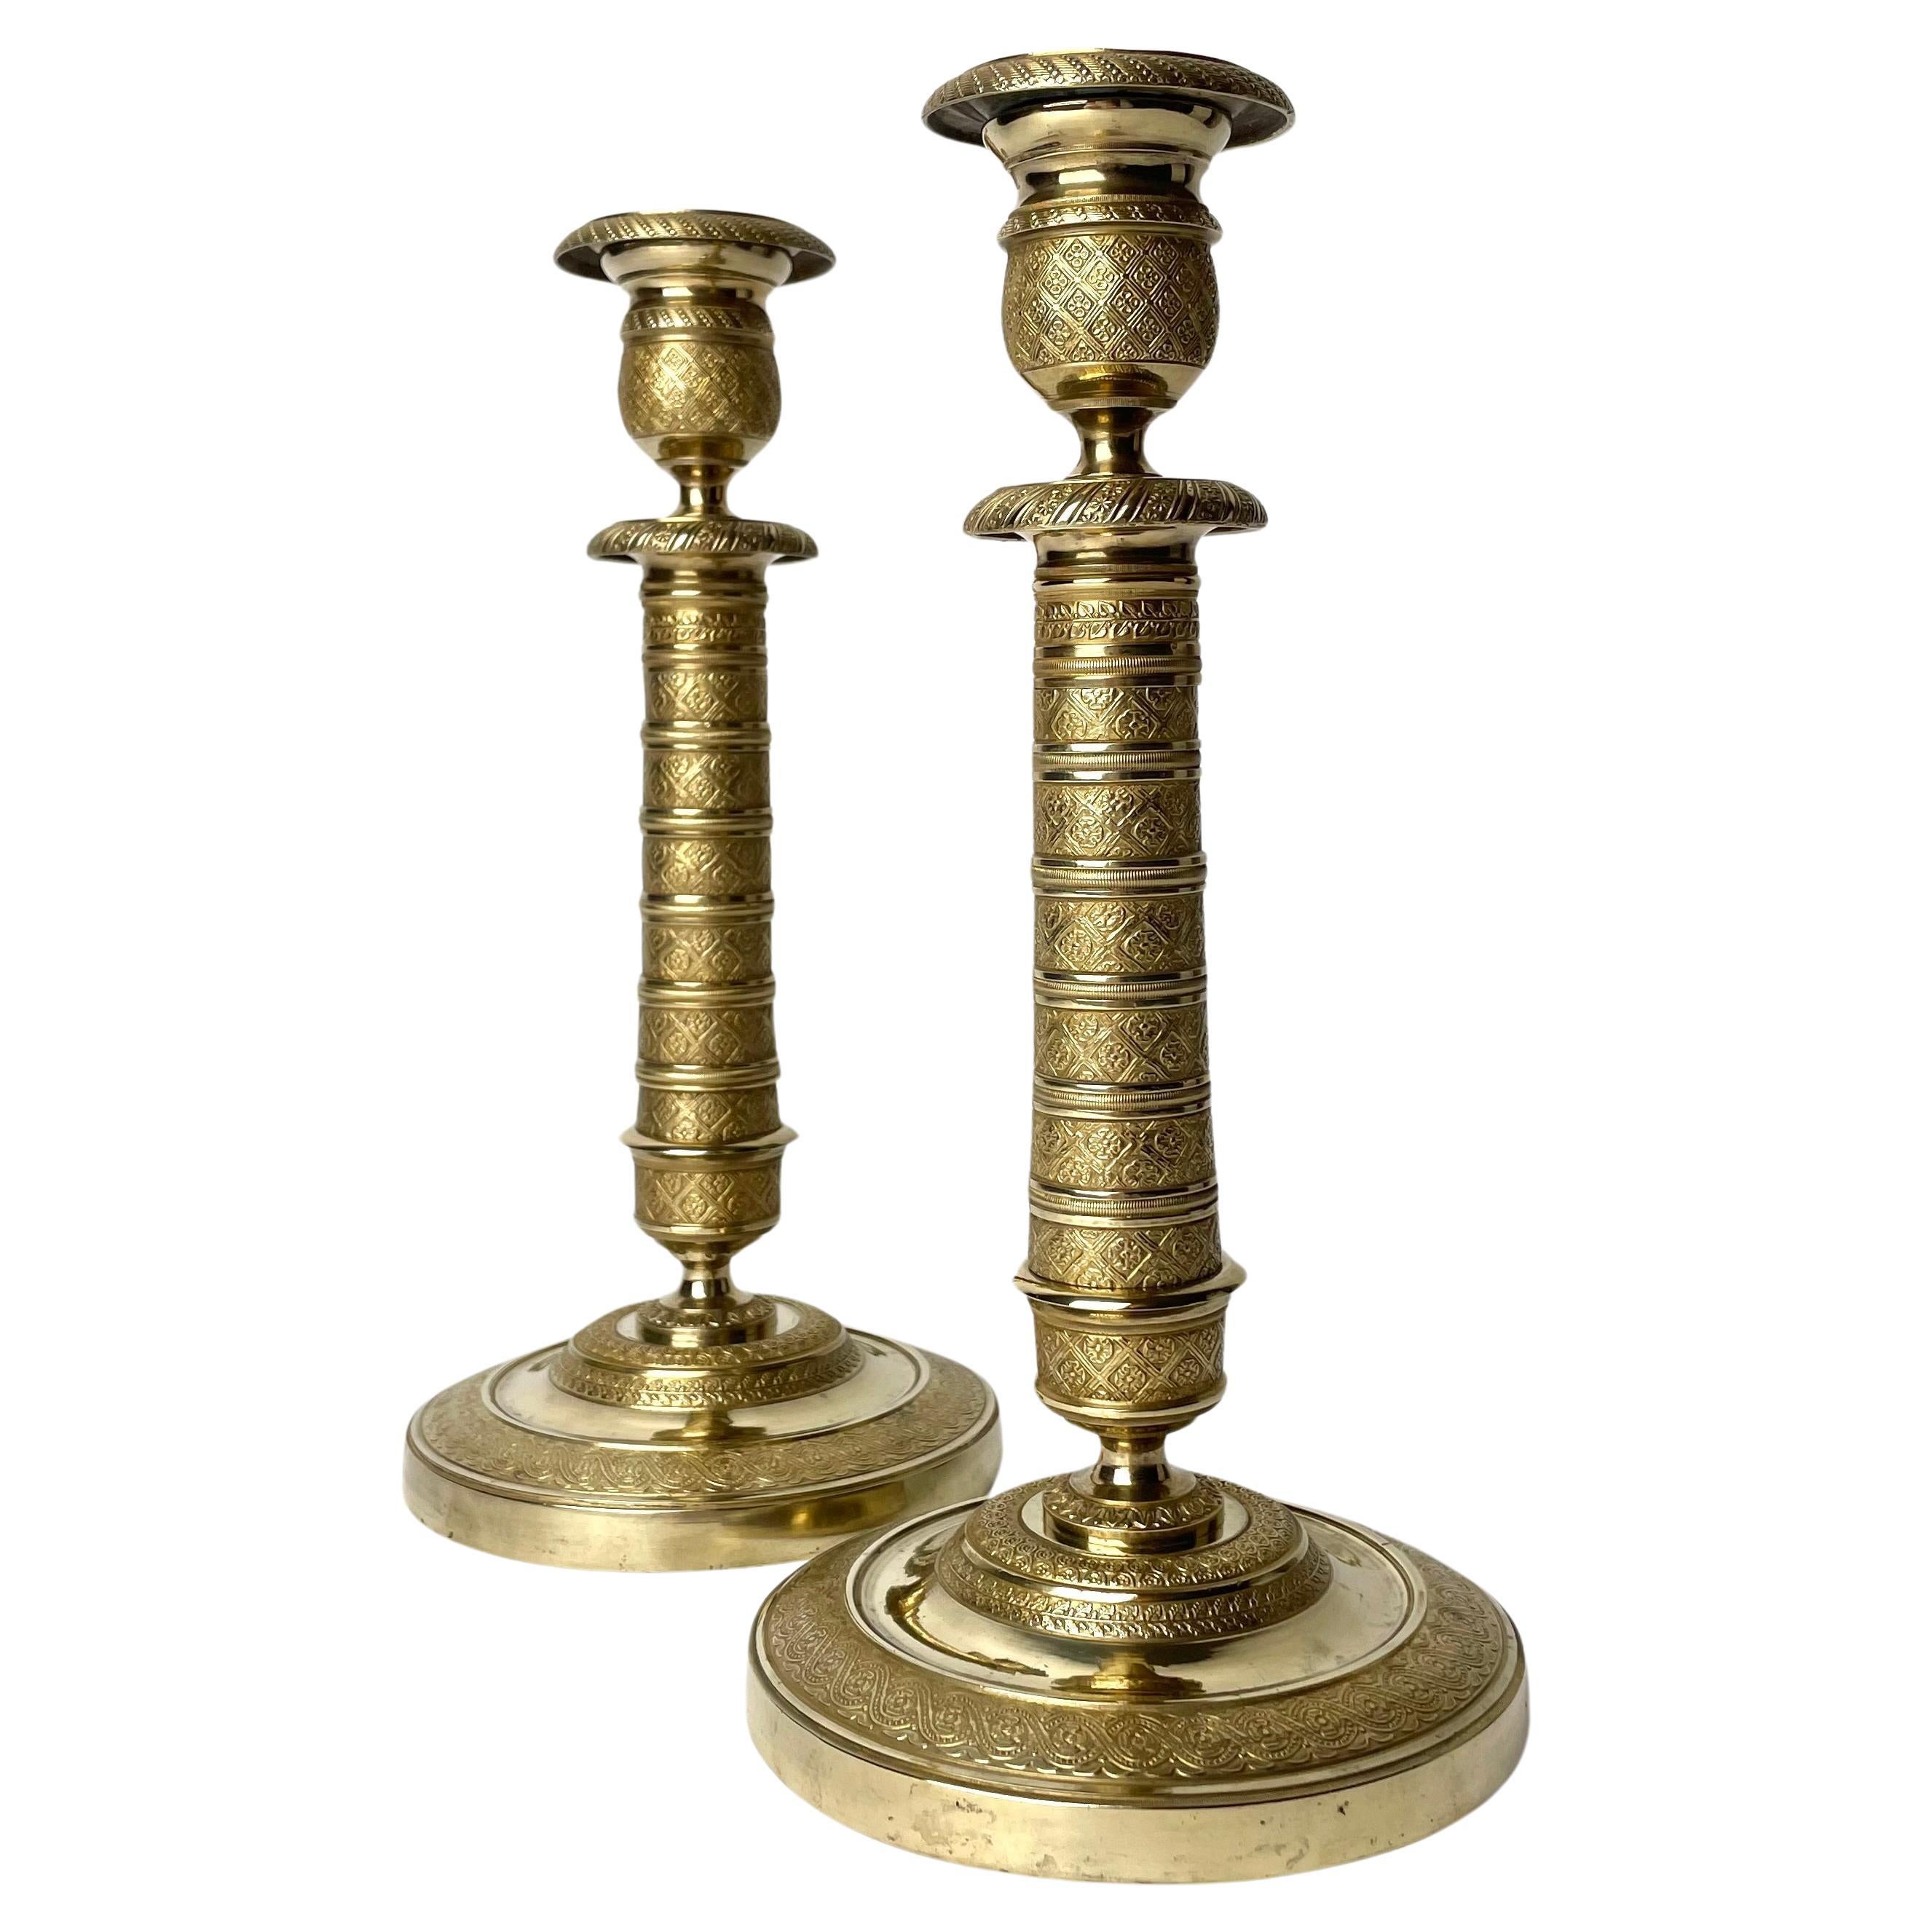 Elegant pair of Empire Candlesticks in gilt bronze from the 1810s. 